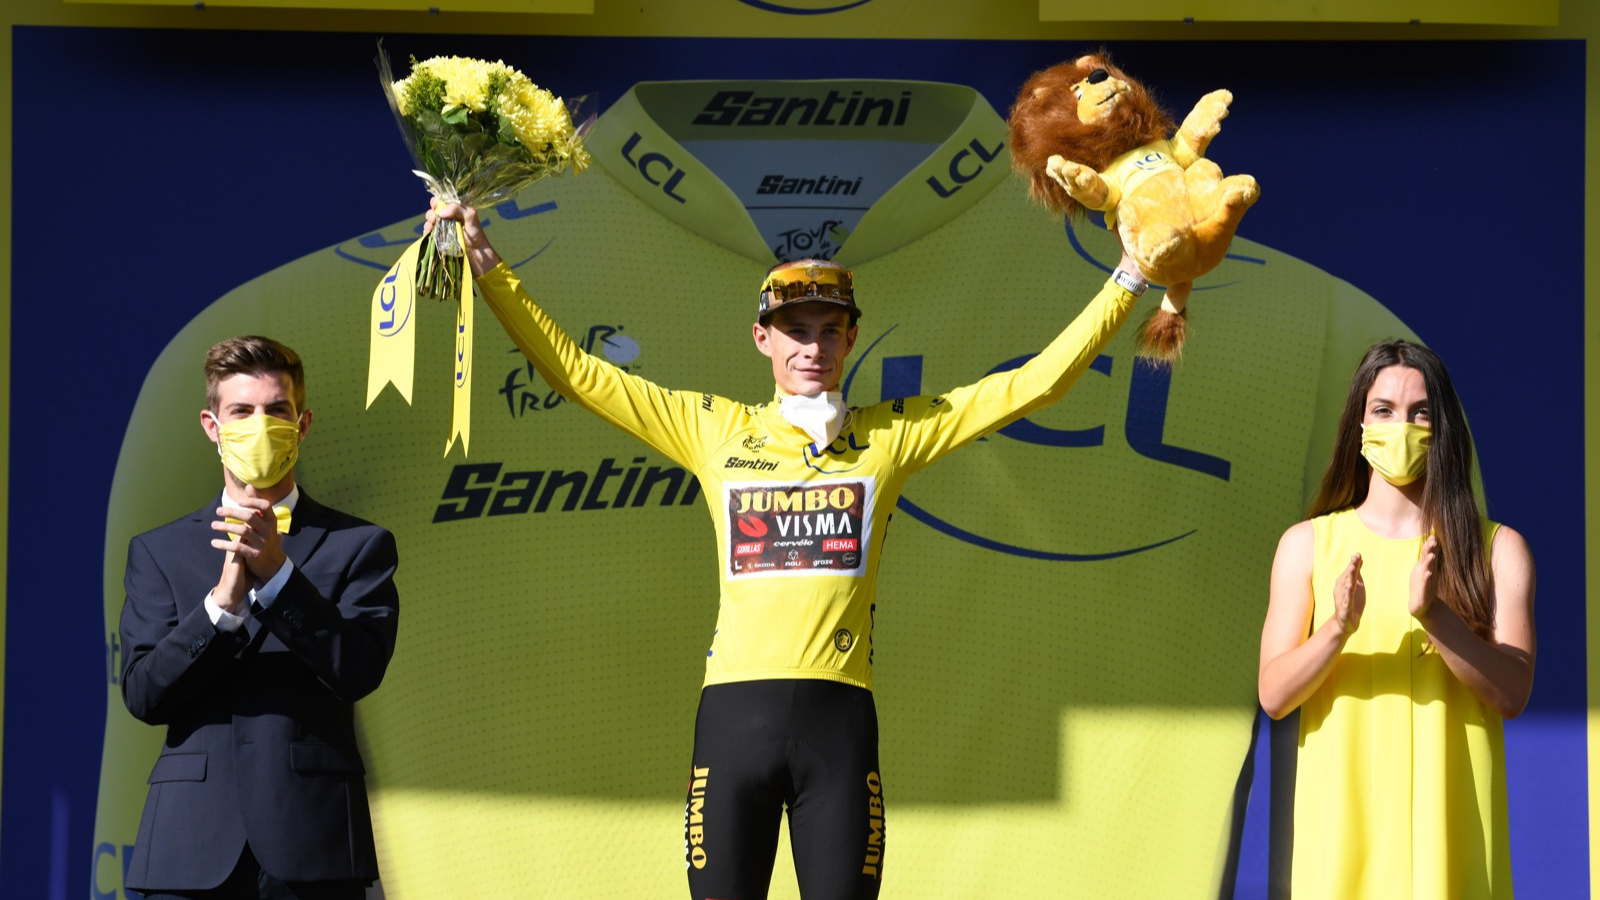 Danish cyclist Jonas Vingegaard wears the yellow jersey since the 11th stage of Tour de France 2022